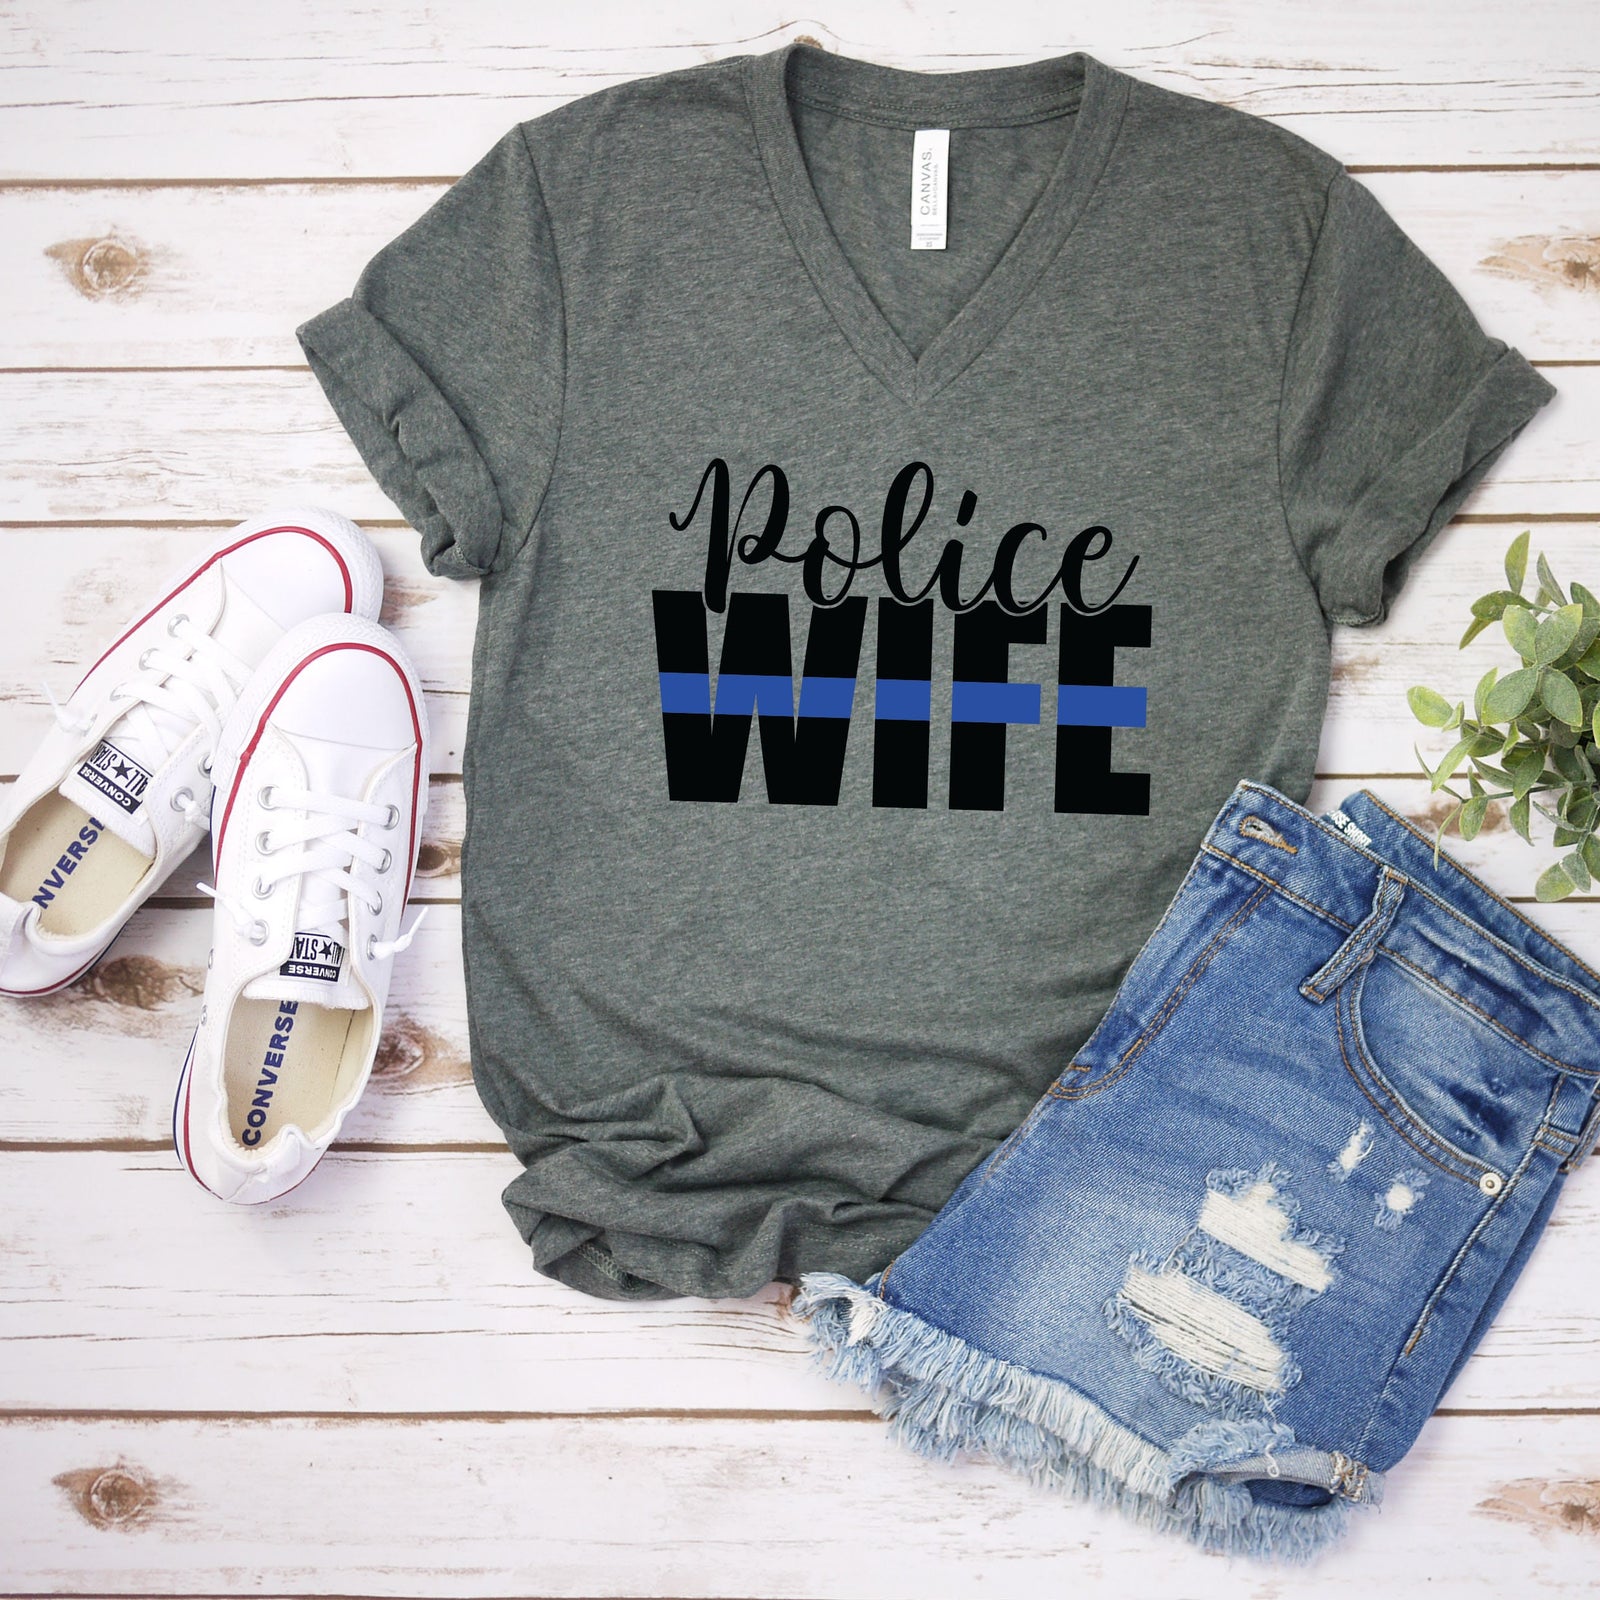 Police Wife T Shirt - Blue Line T Shirt - Police T Shirt